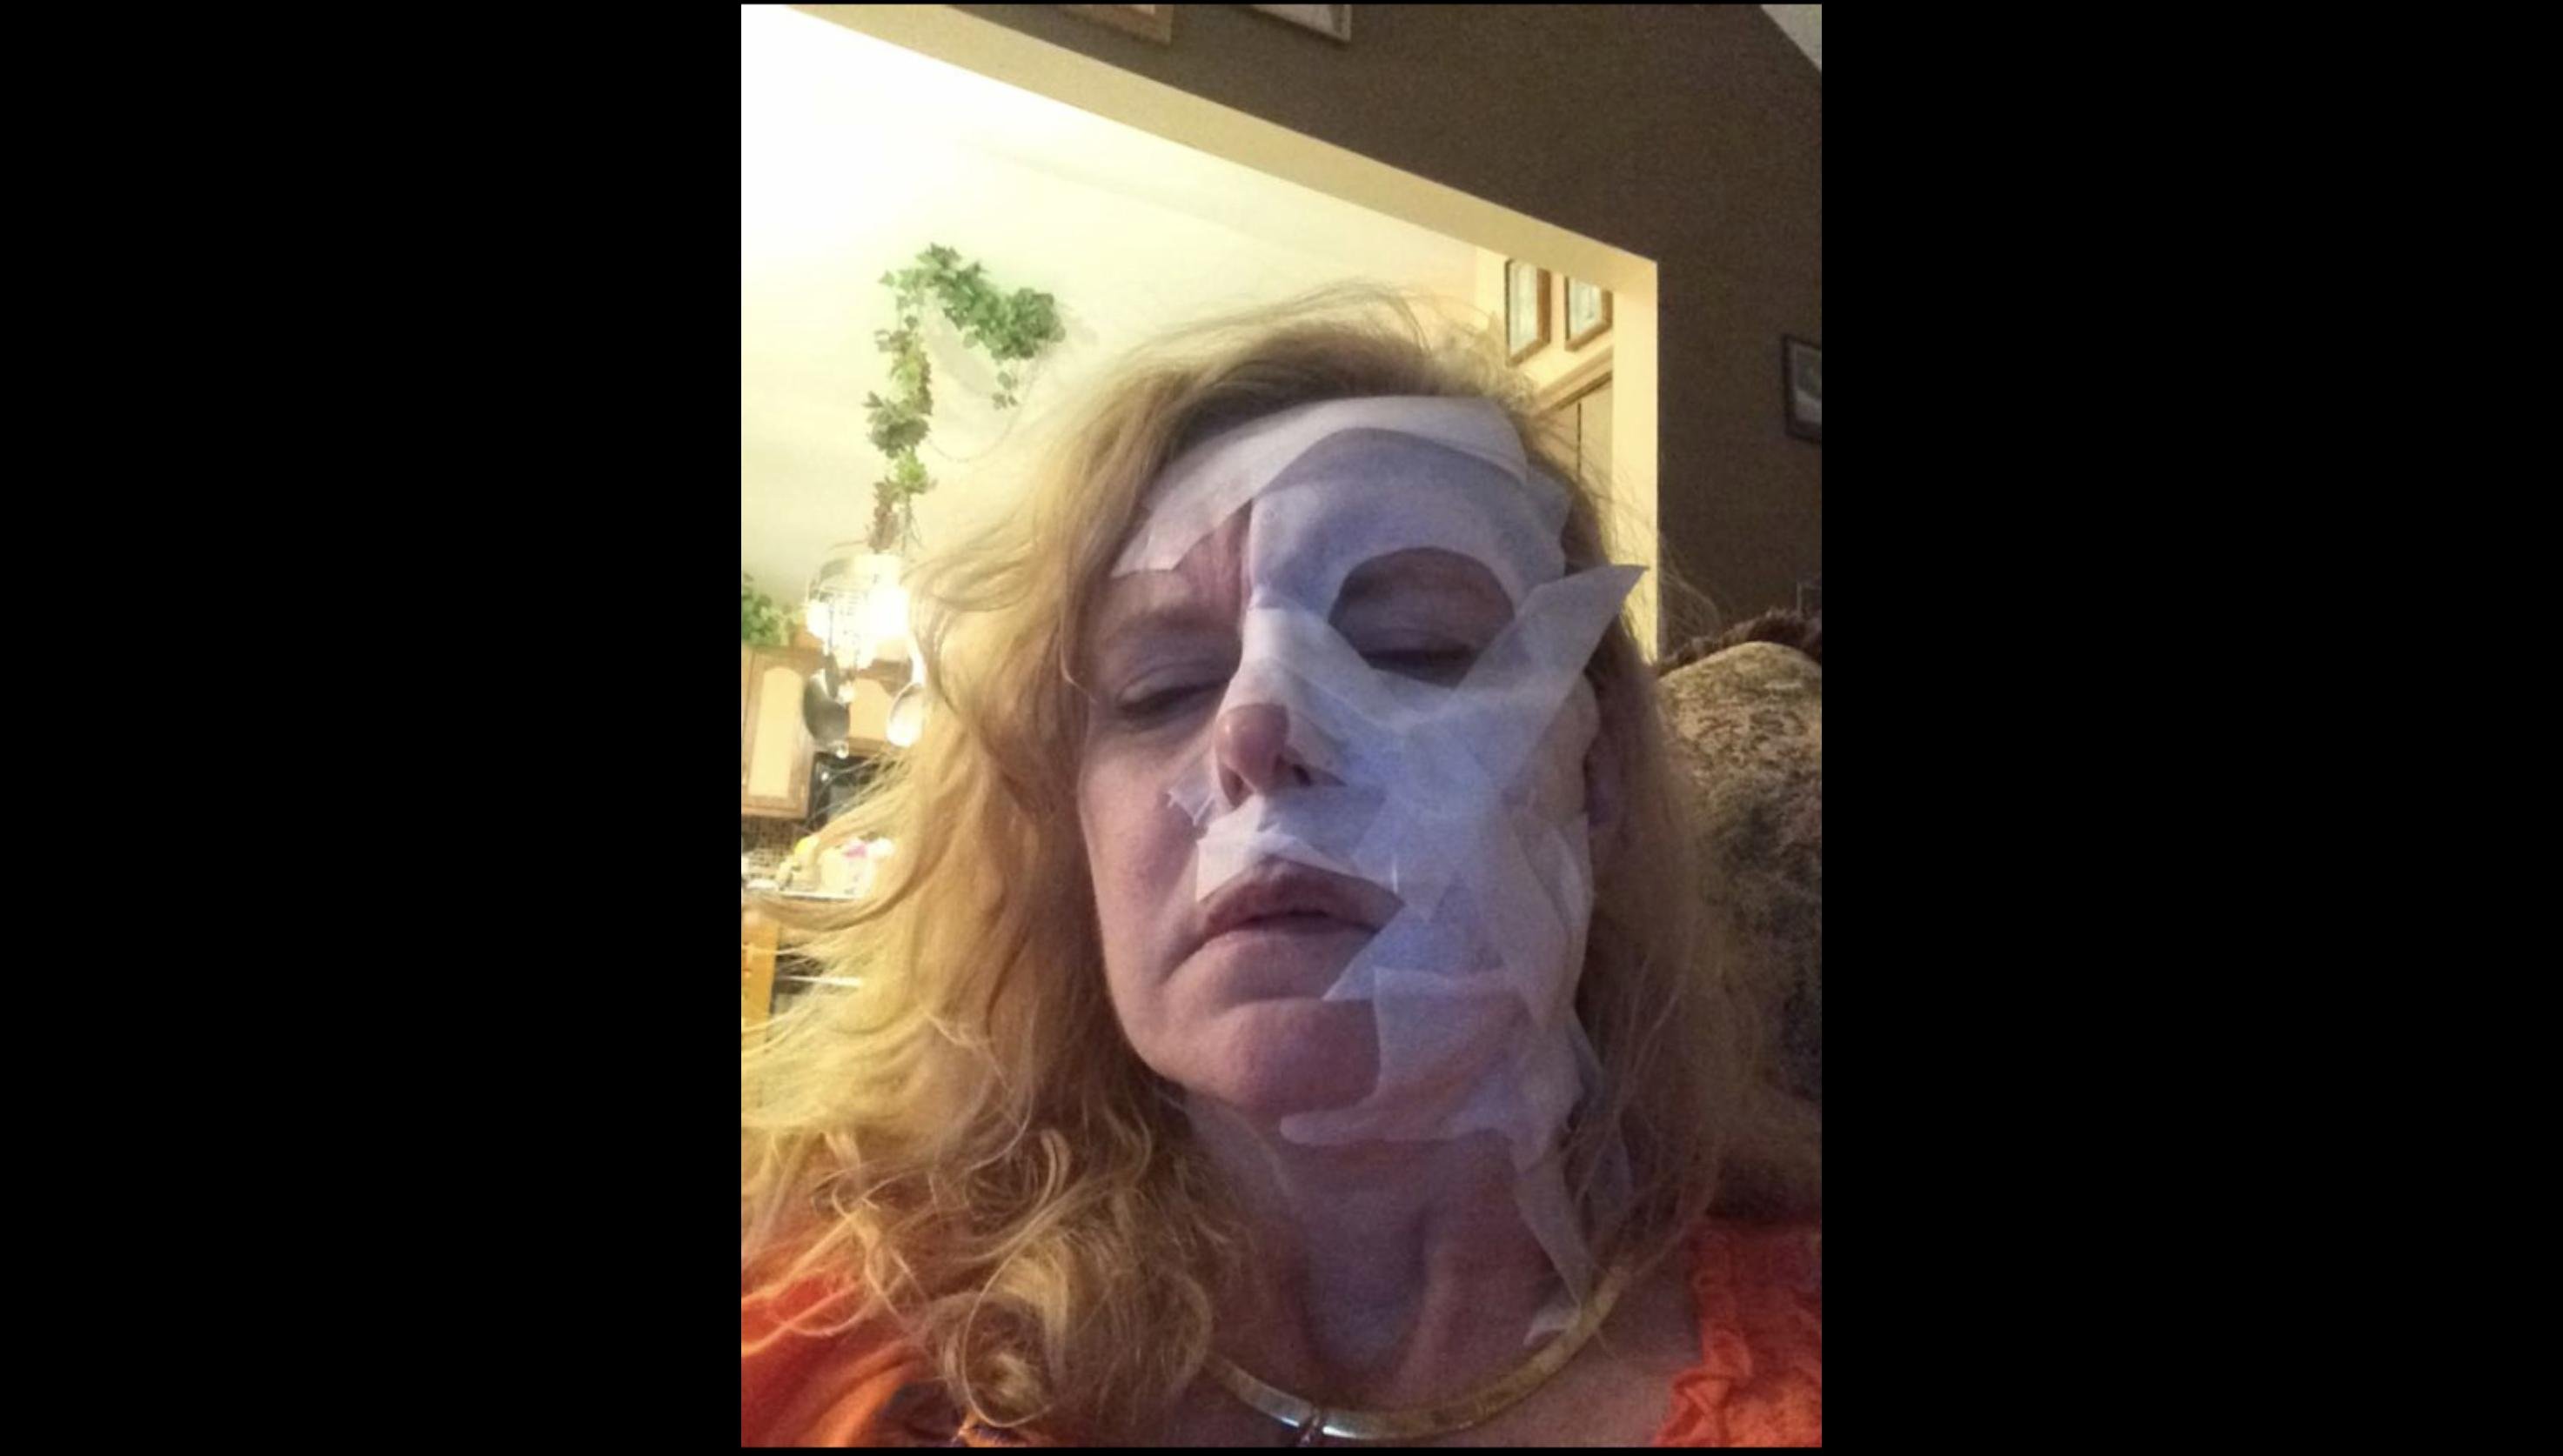 Rene Urbanek says she uses Lidocaine patches on her face to numb her skin when it feels like it’s “burning on fire.” (Courtesy of Rene Urbanek)